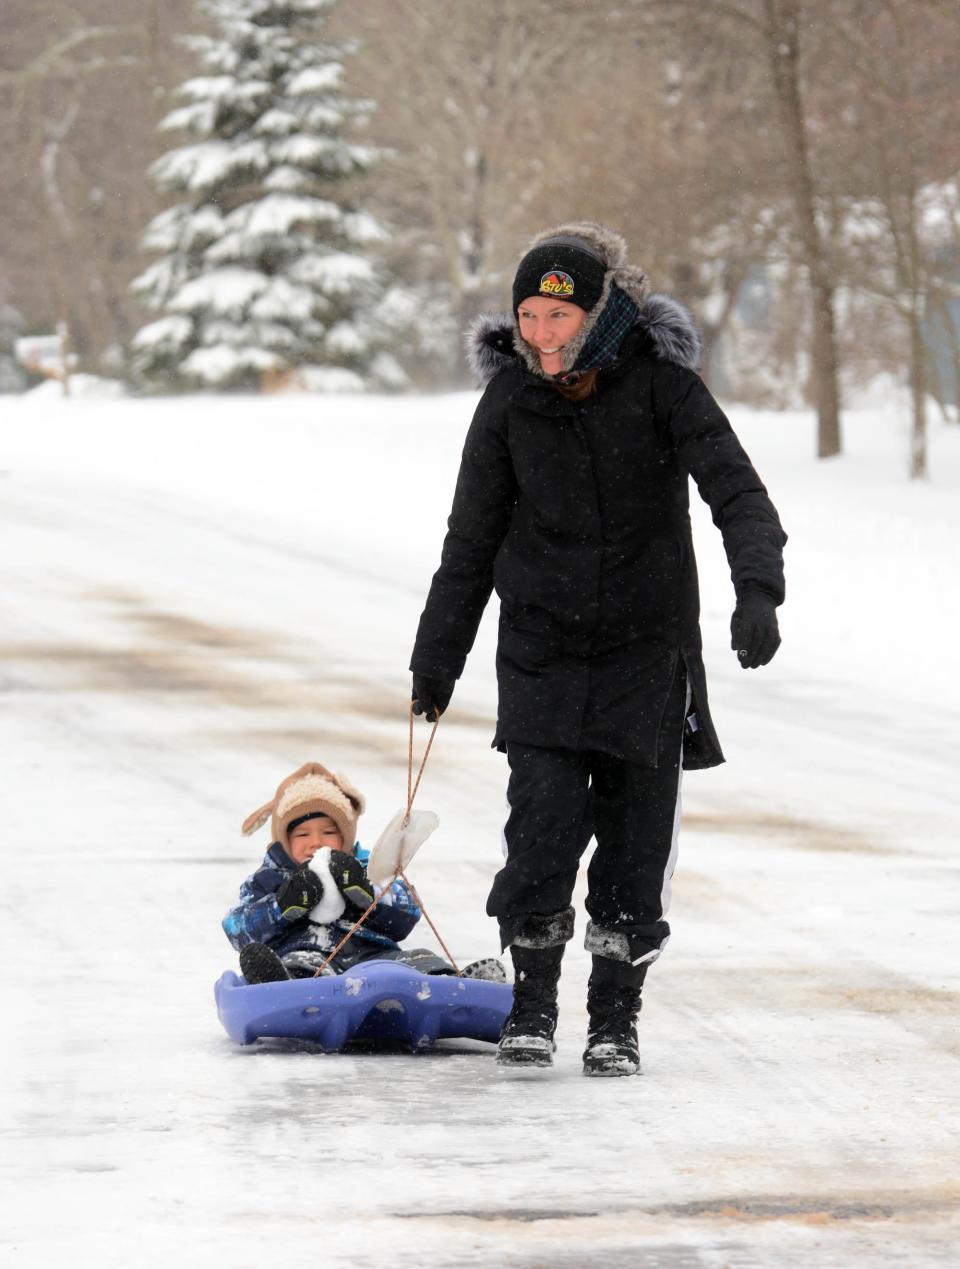 Nicole LeBlanc of Colchester pulls her son, Ryan, 2, in a sled after a snowstorm in Colchester. She said of the snow, "We love it. I love the winter more than the summer."